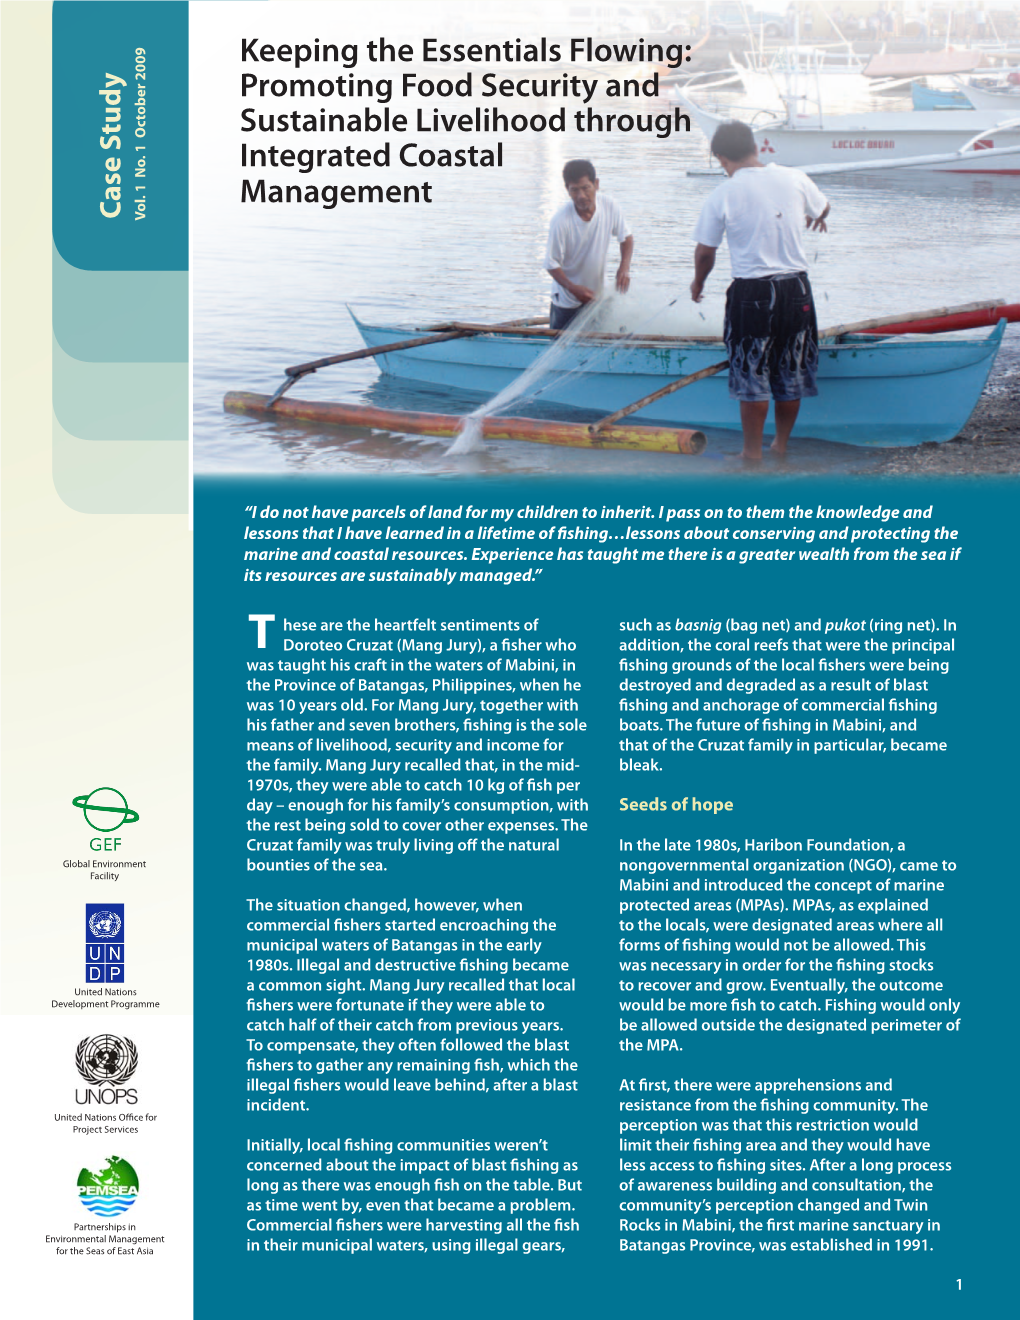 Promoting Food Security and Sustainable Livelihood Through Integrated Coastal Management Vol